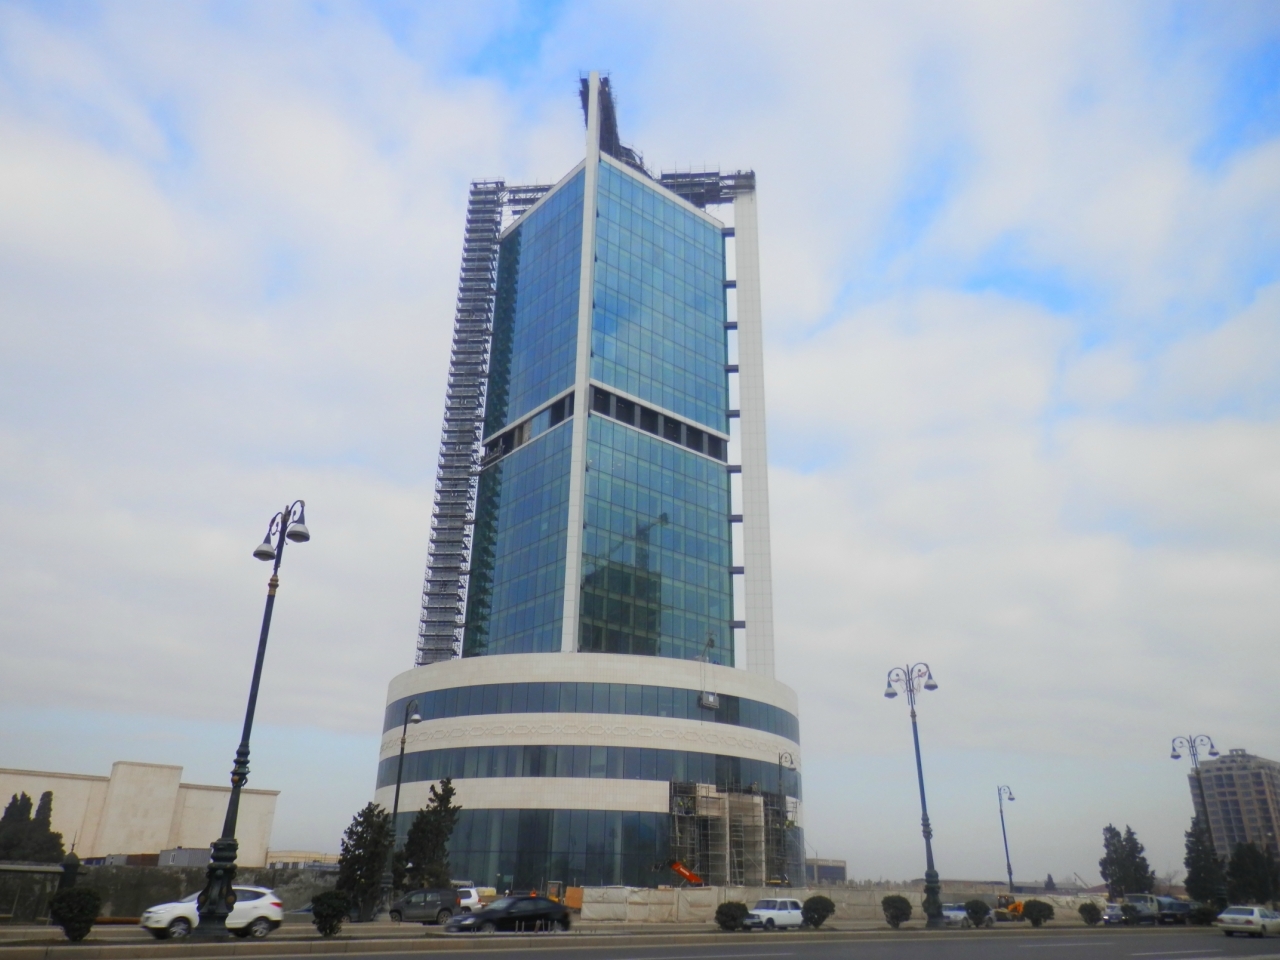 Azerbaijan state oil fund's assets fell 5% in first half of 2015